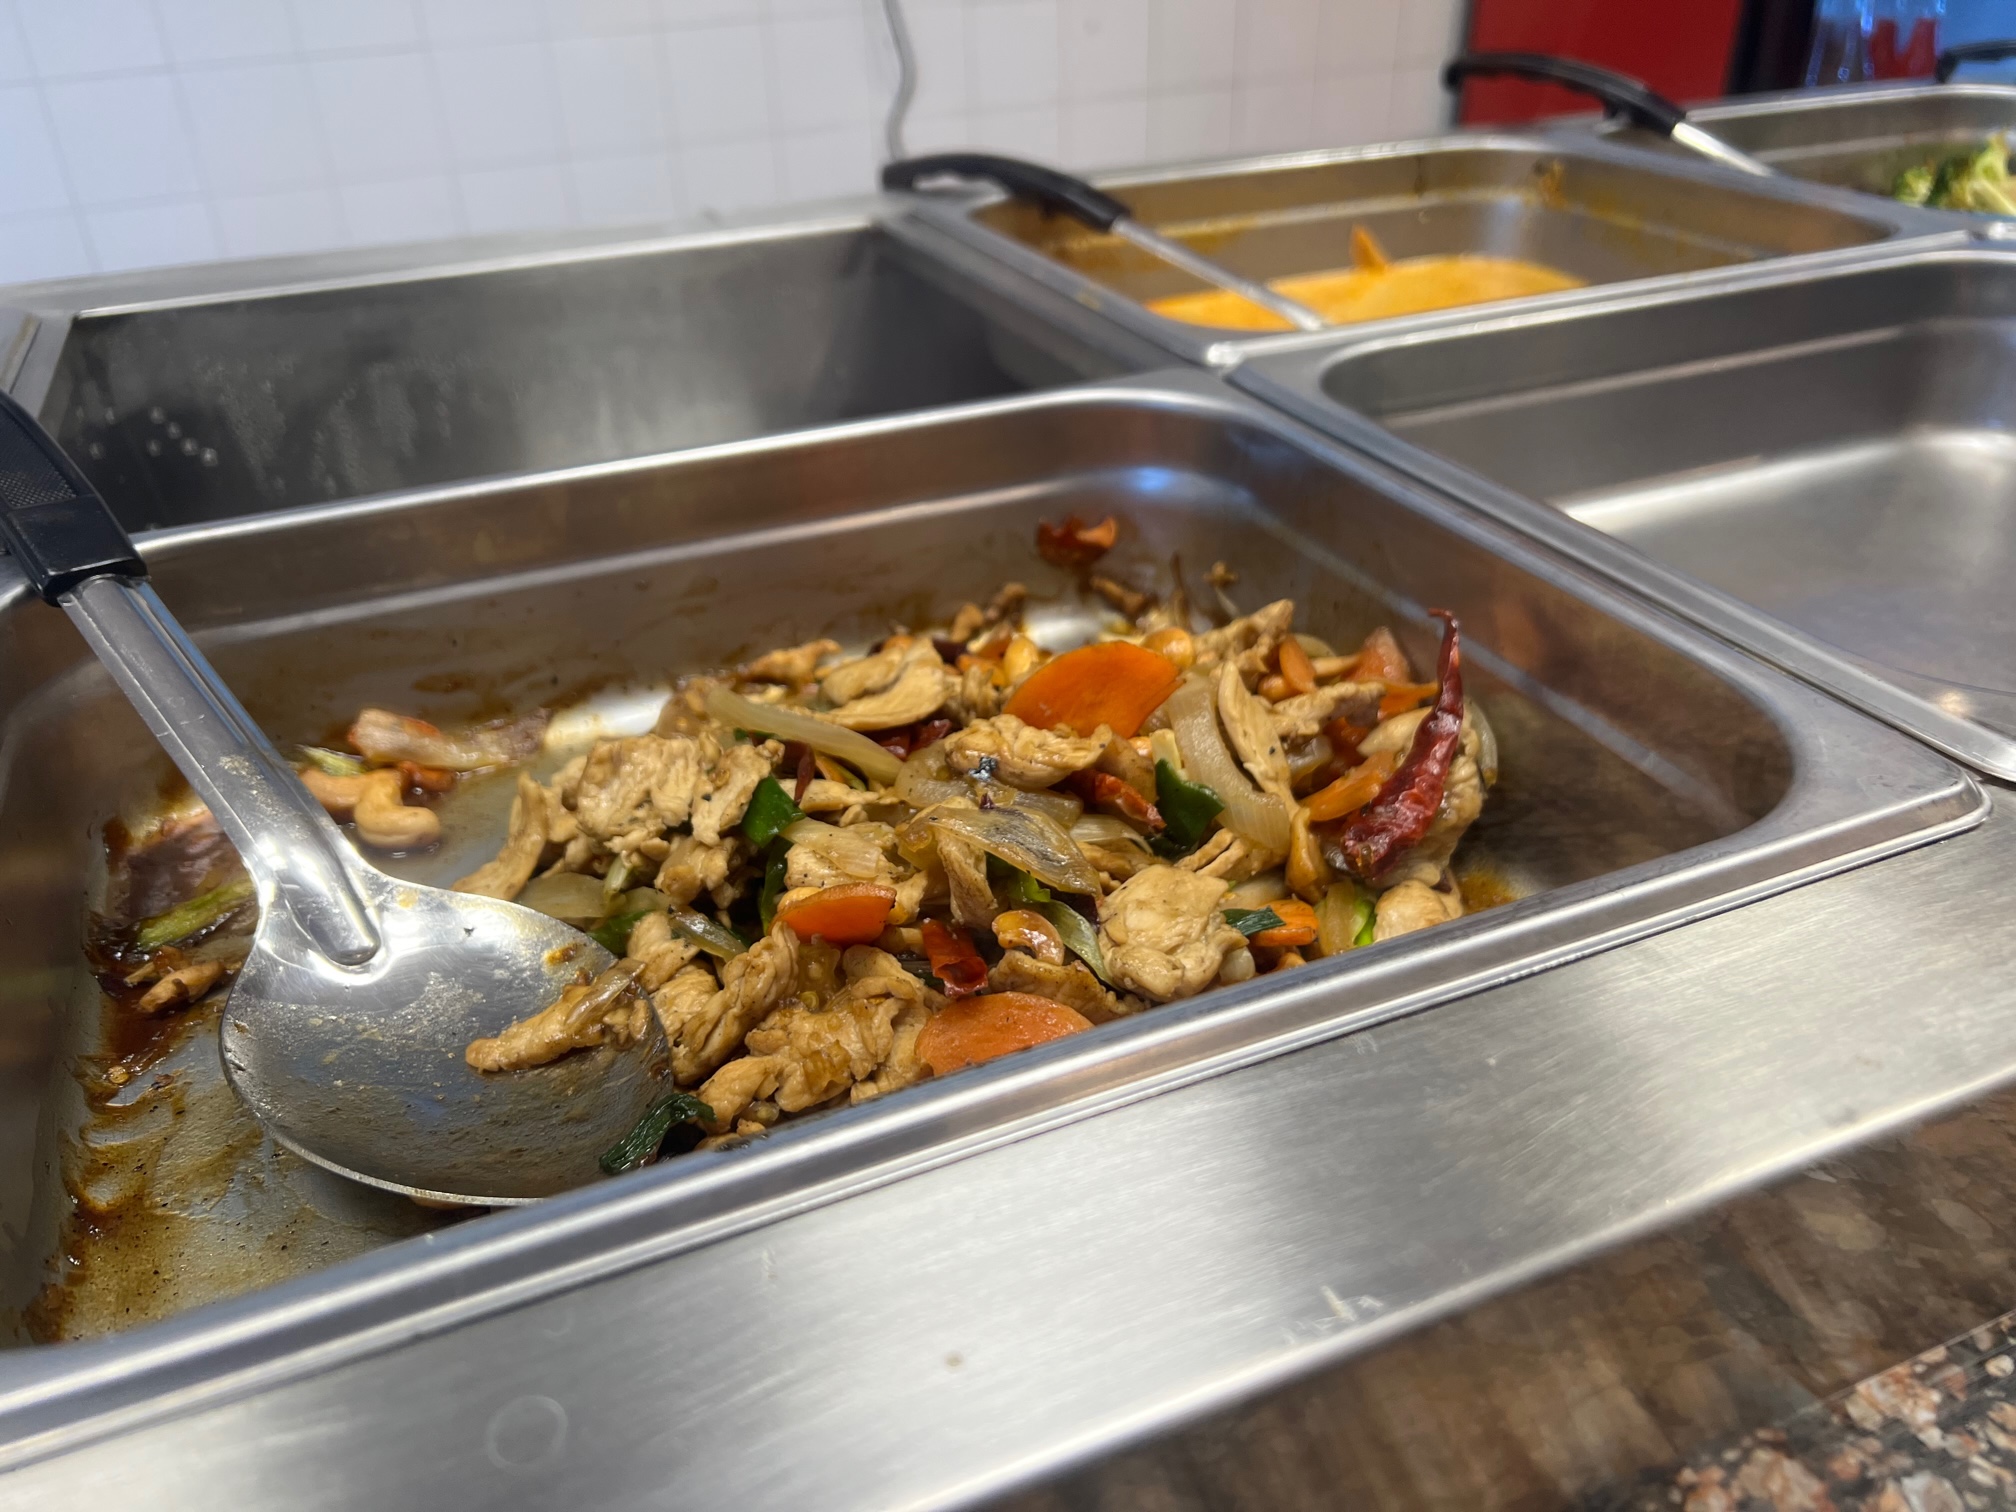 Behind a glass, there is a mostly empty silver pan of chicken with big red chilis and a large serving spoon. Photo by Alyssa Buckley.